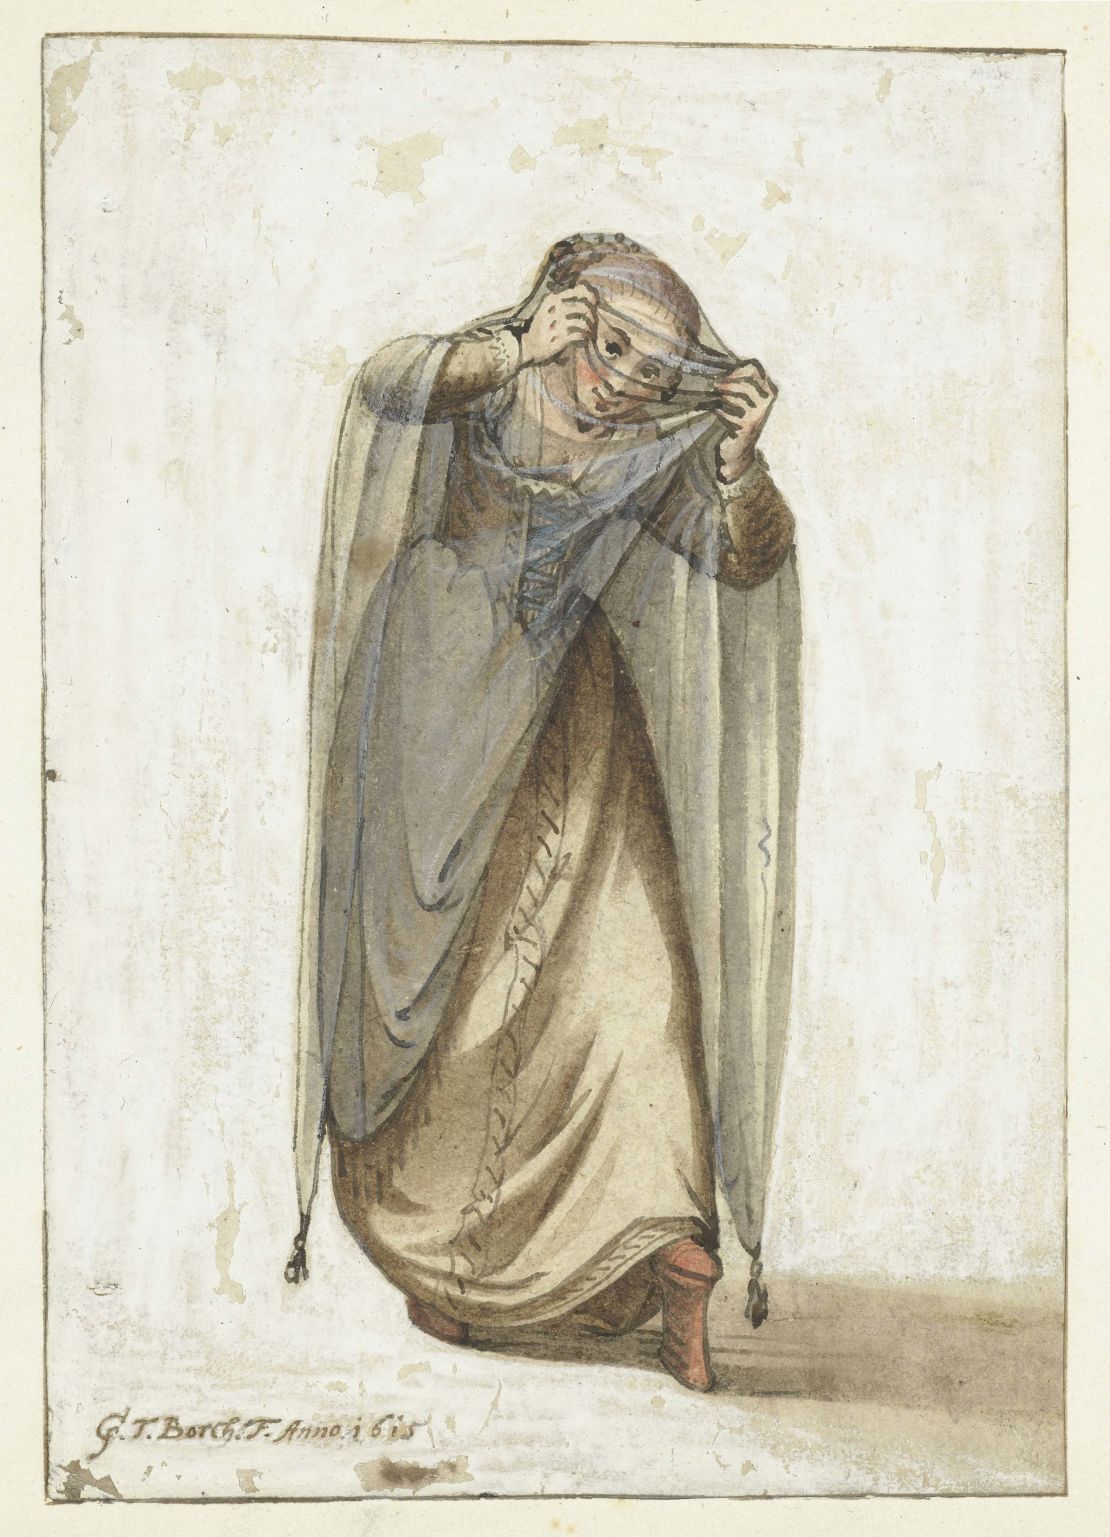 Platform shoes seen in an illustration of a Venetian courtesan housed in the Rijksmuseum, dated to between 1660 and 1670.